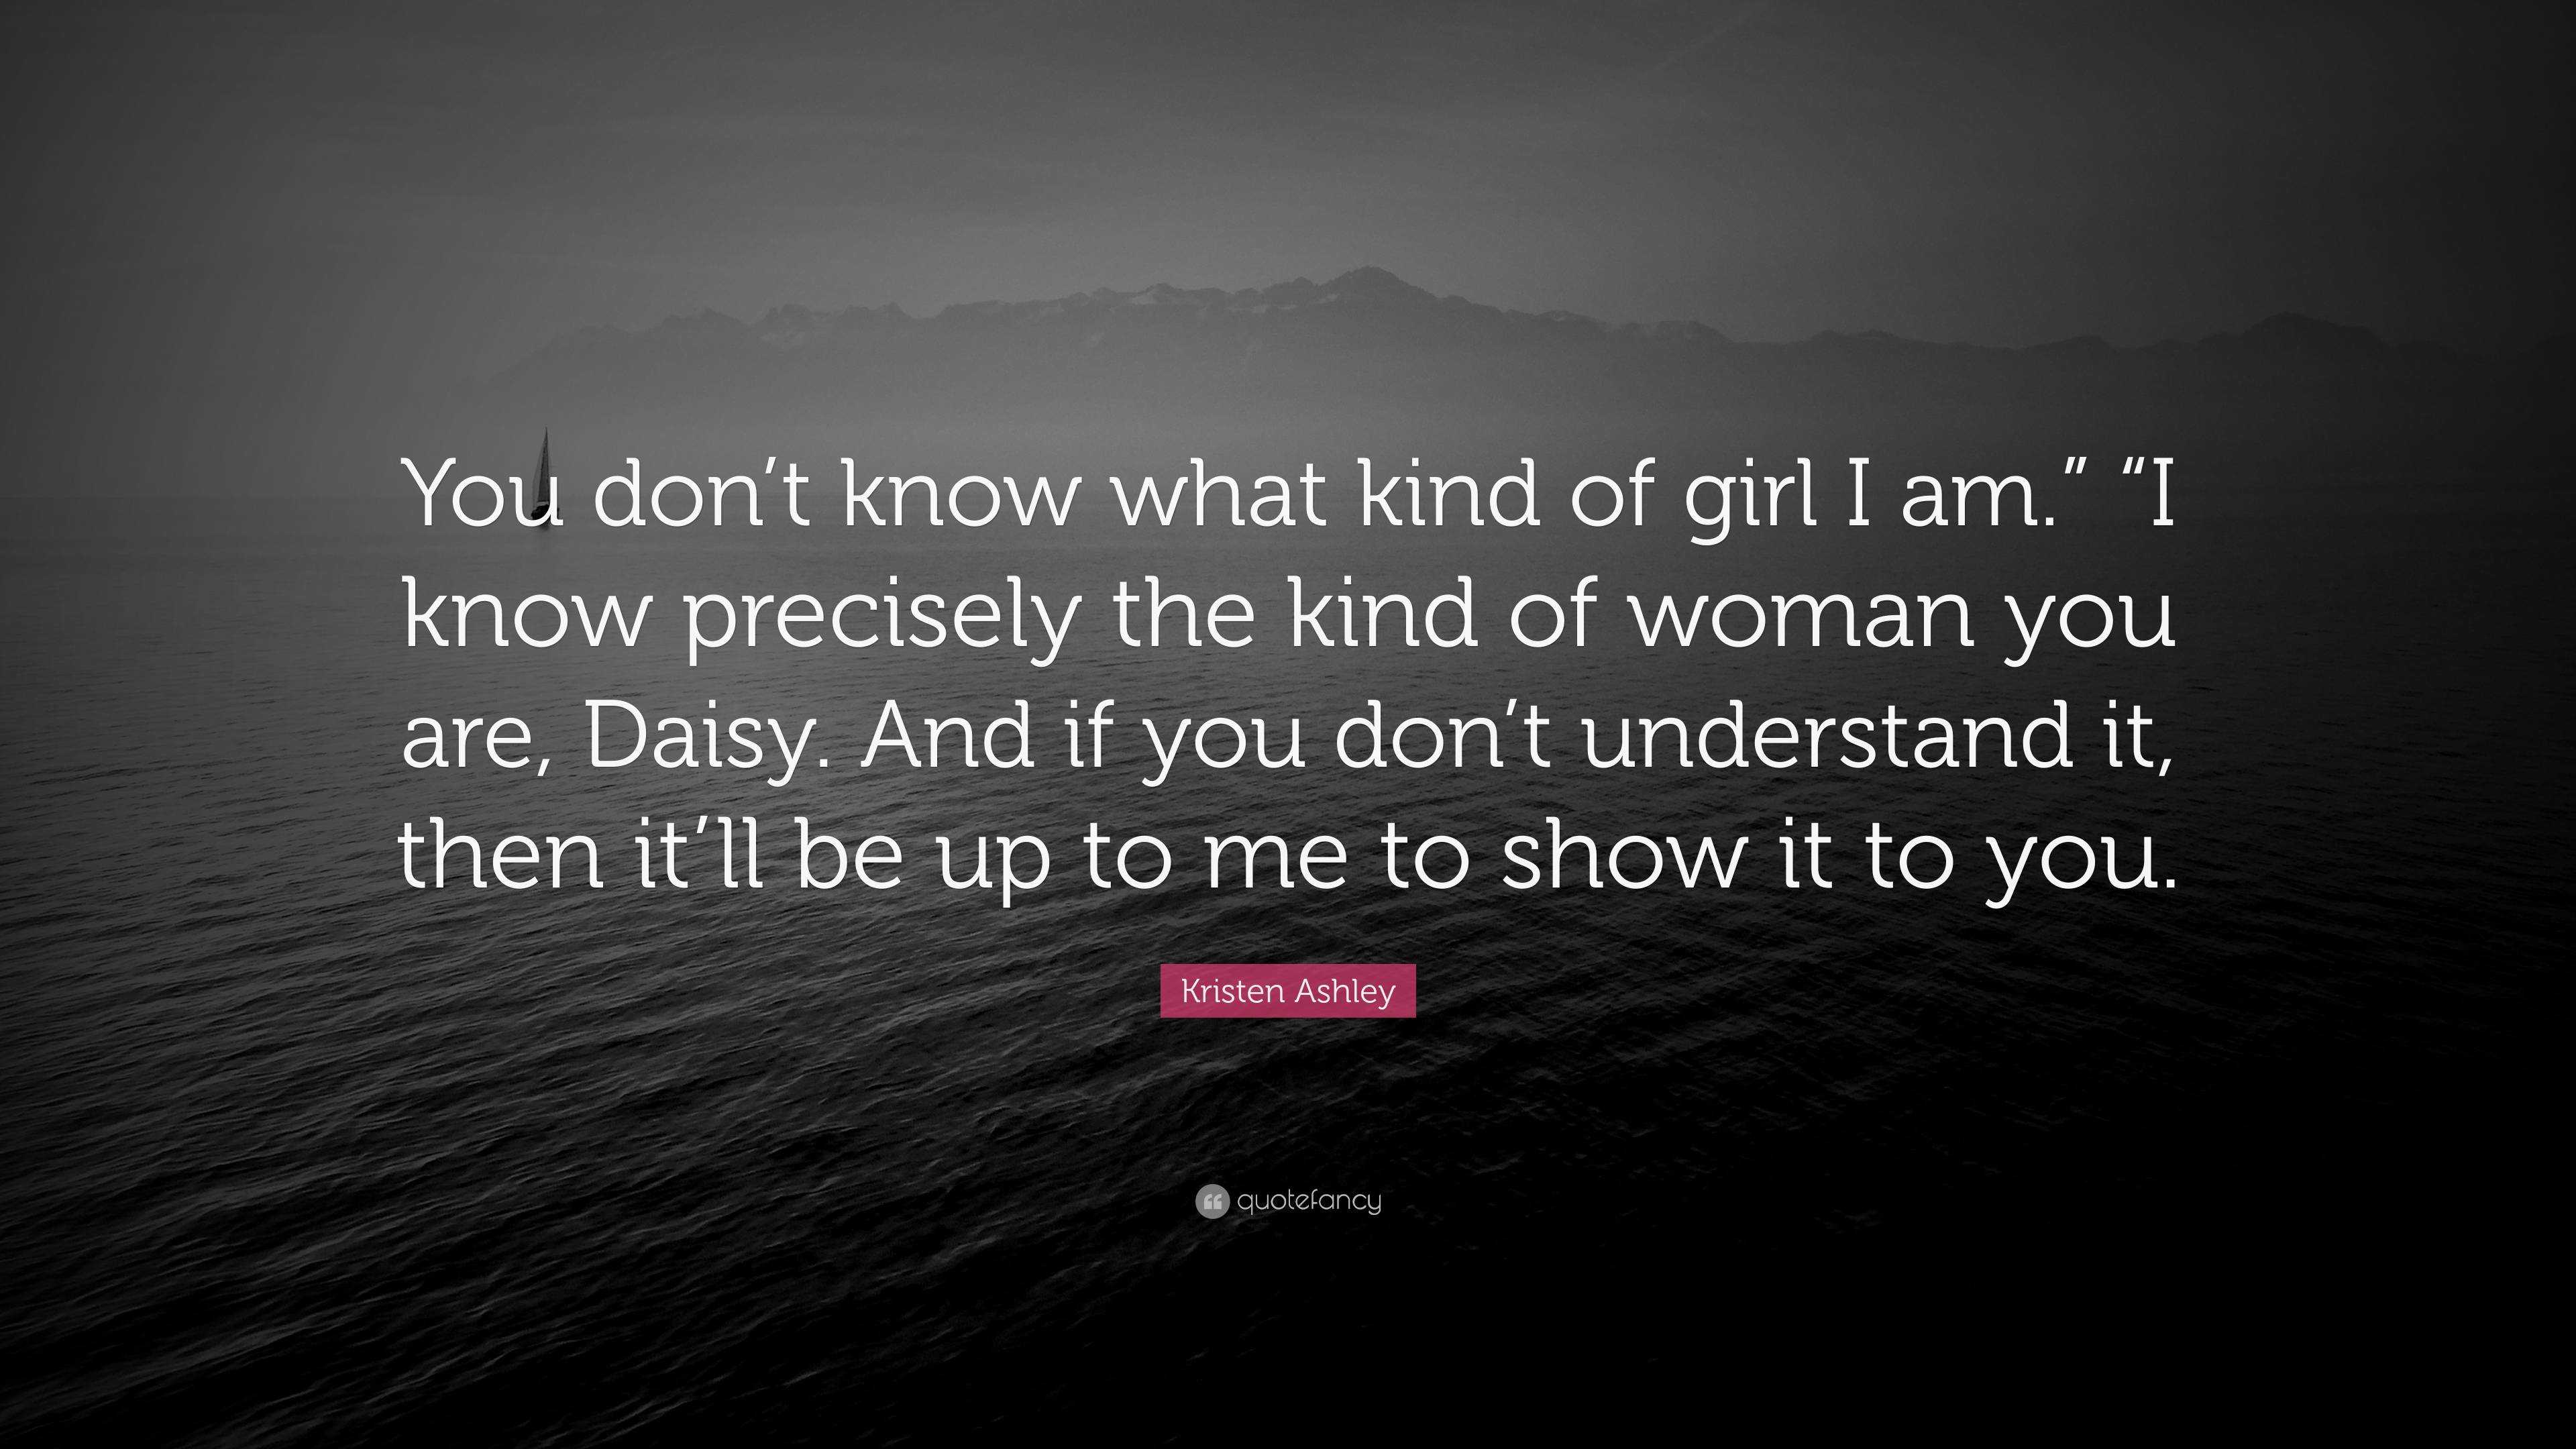 Kristen Ashley Quote “you Don T Know What Kind Of Girl I Am ” “i Know Precisely The Kind Of